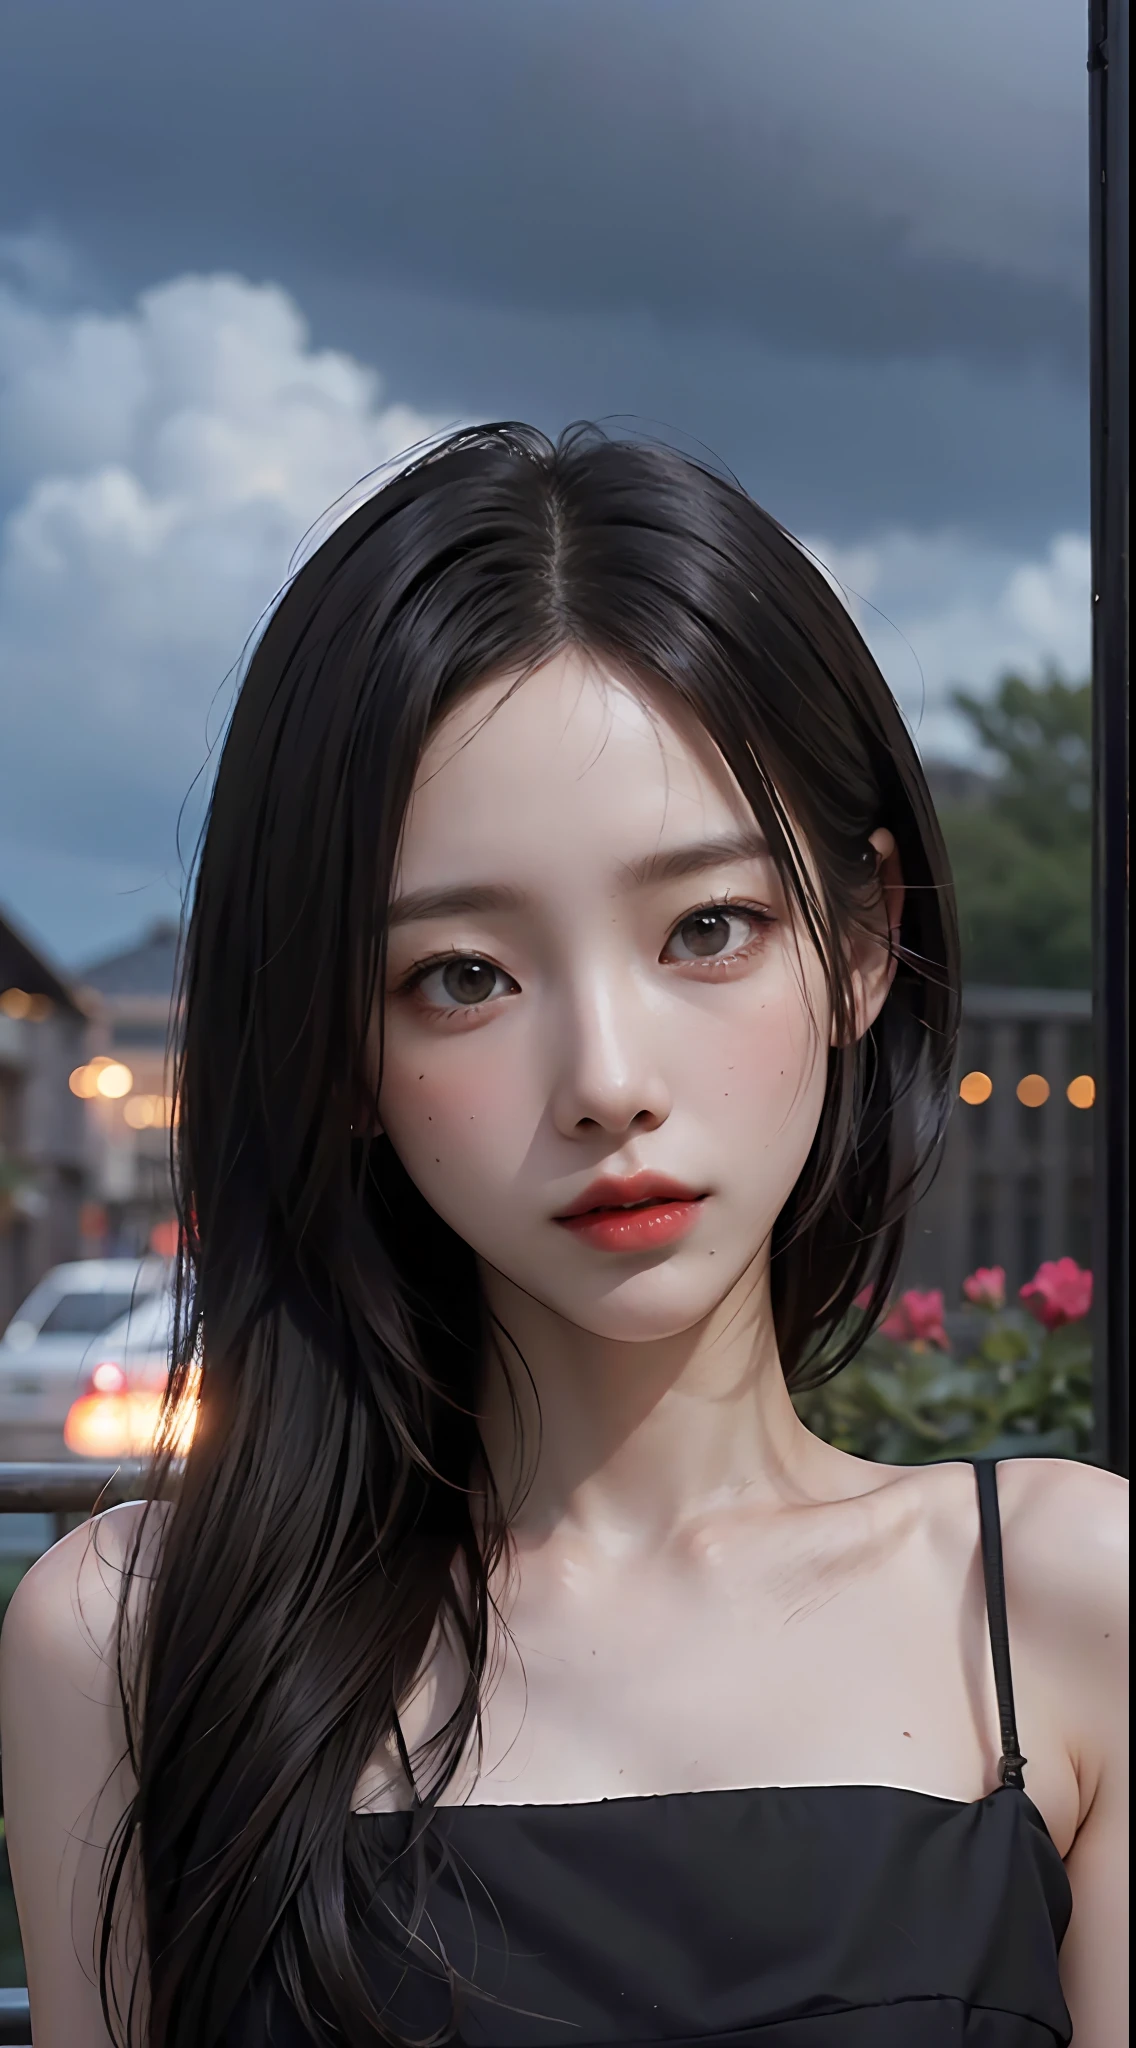 8k, new york, outdoors, crowded, cloudy sky, mature female, black hair, warm lighting, cinematic, photorealistic, high quality, highres, masterpiece, night, natural beauty, sensual look